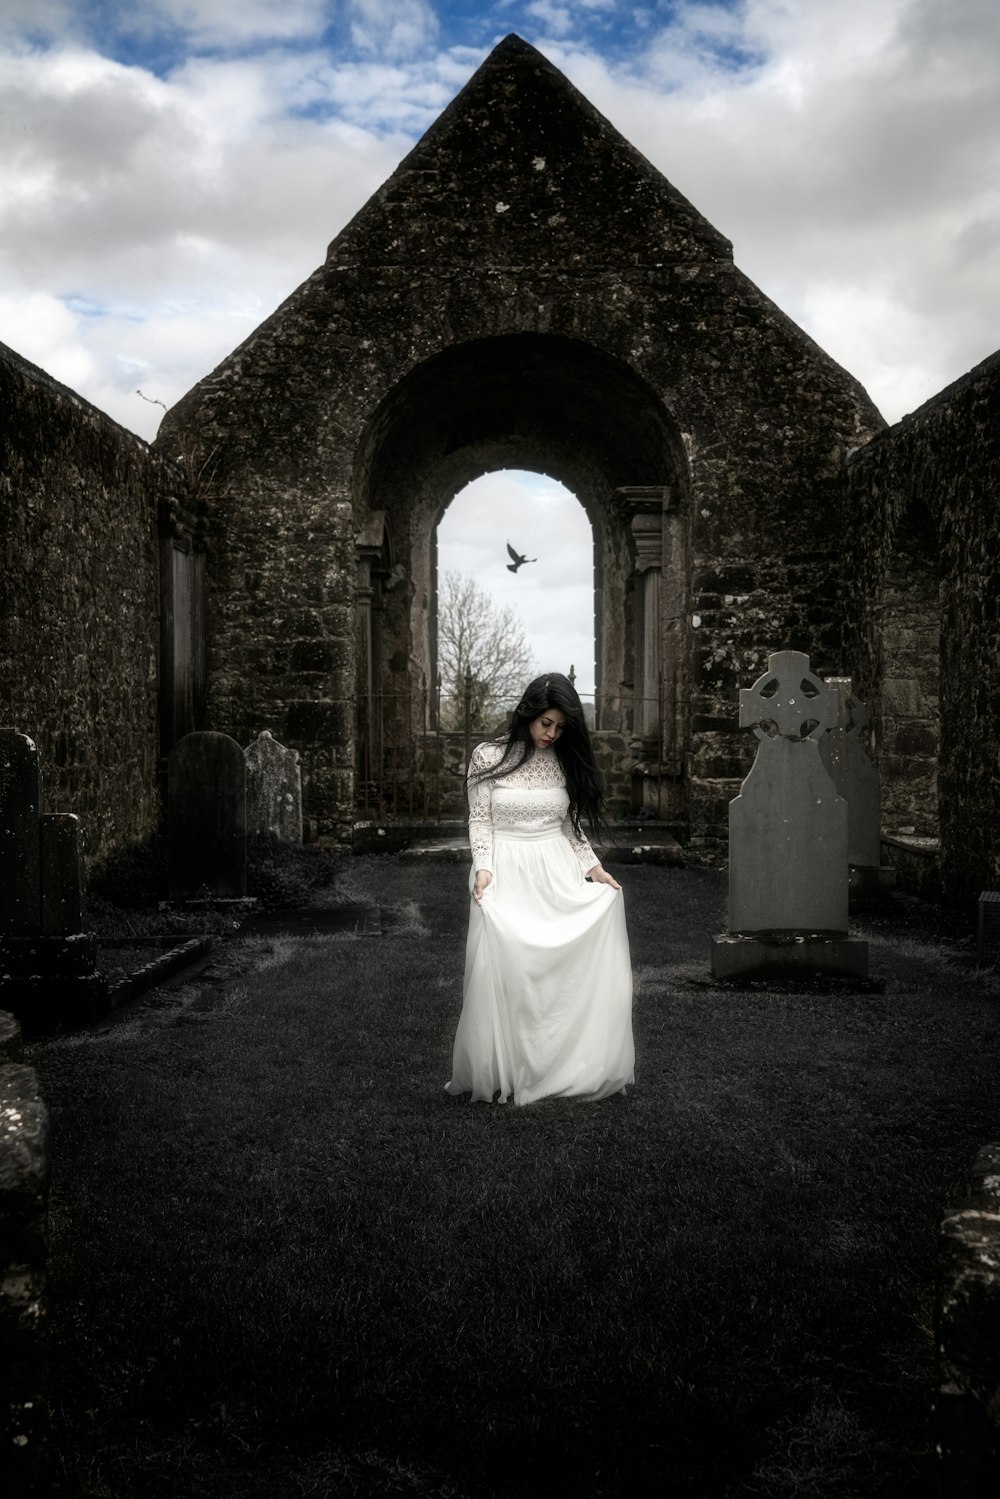 a woman in a white dress standing in a graveyard